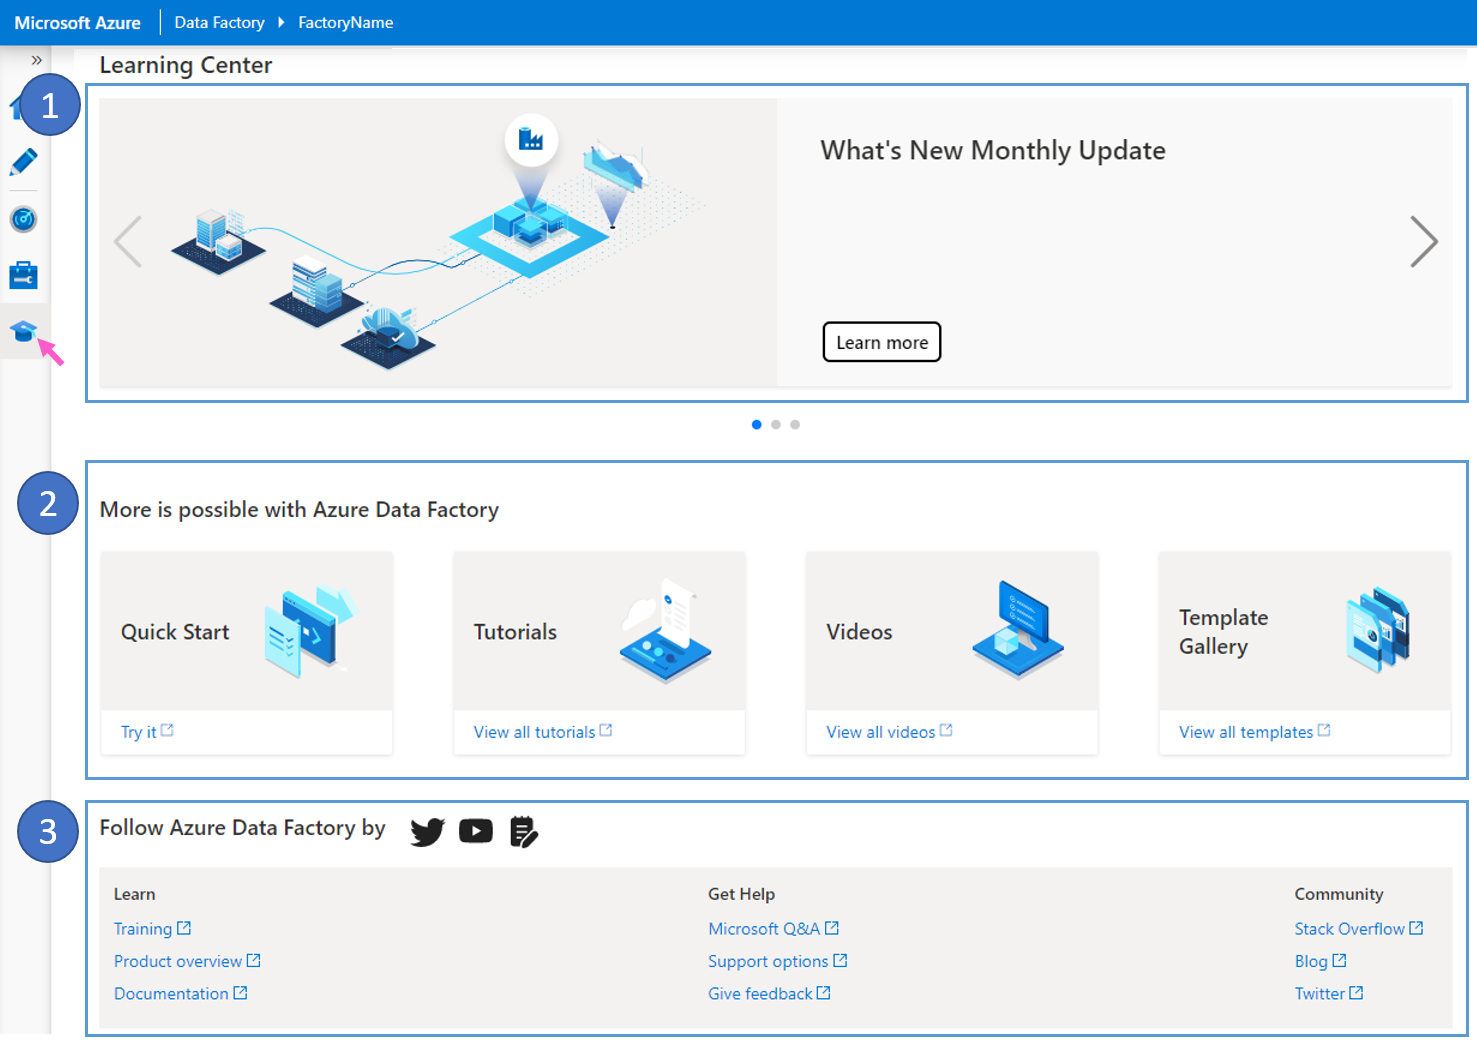 Introducing the Learning Center to Azure Data Factory Studio